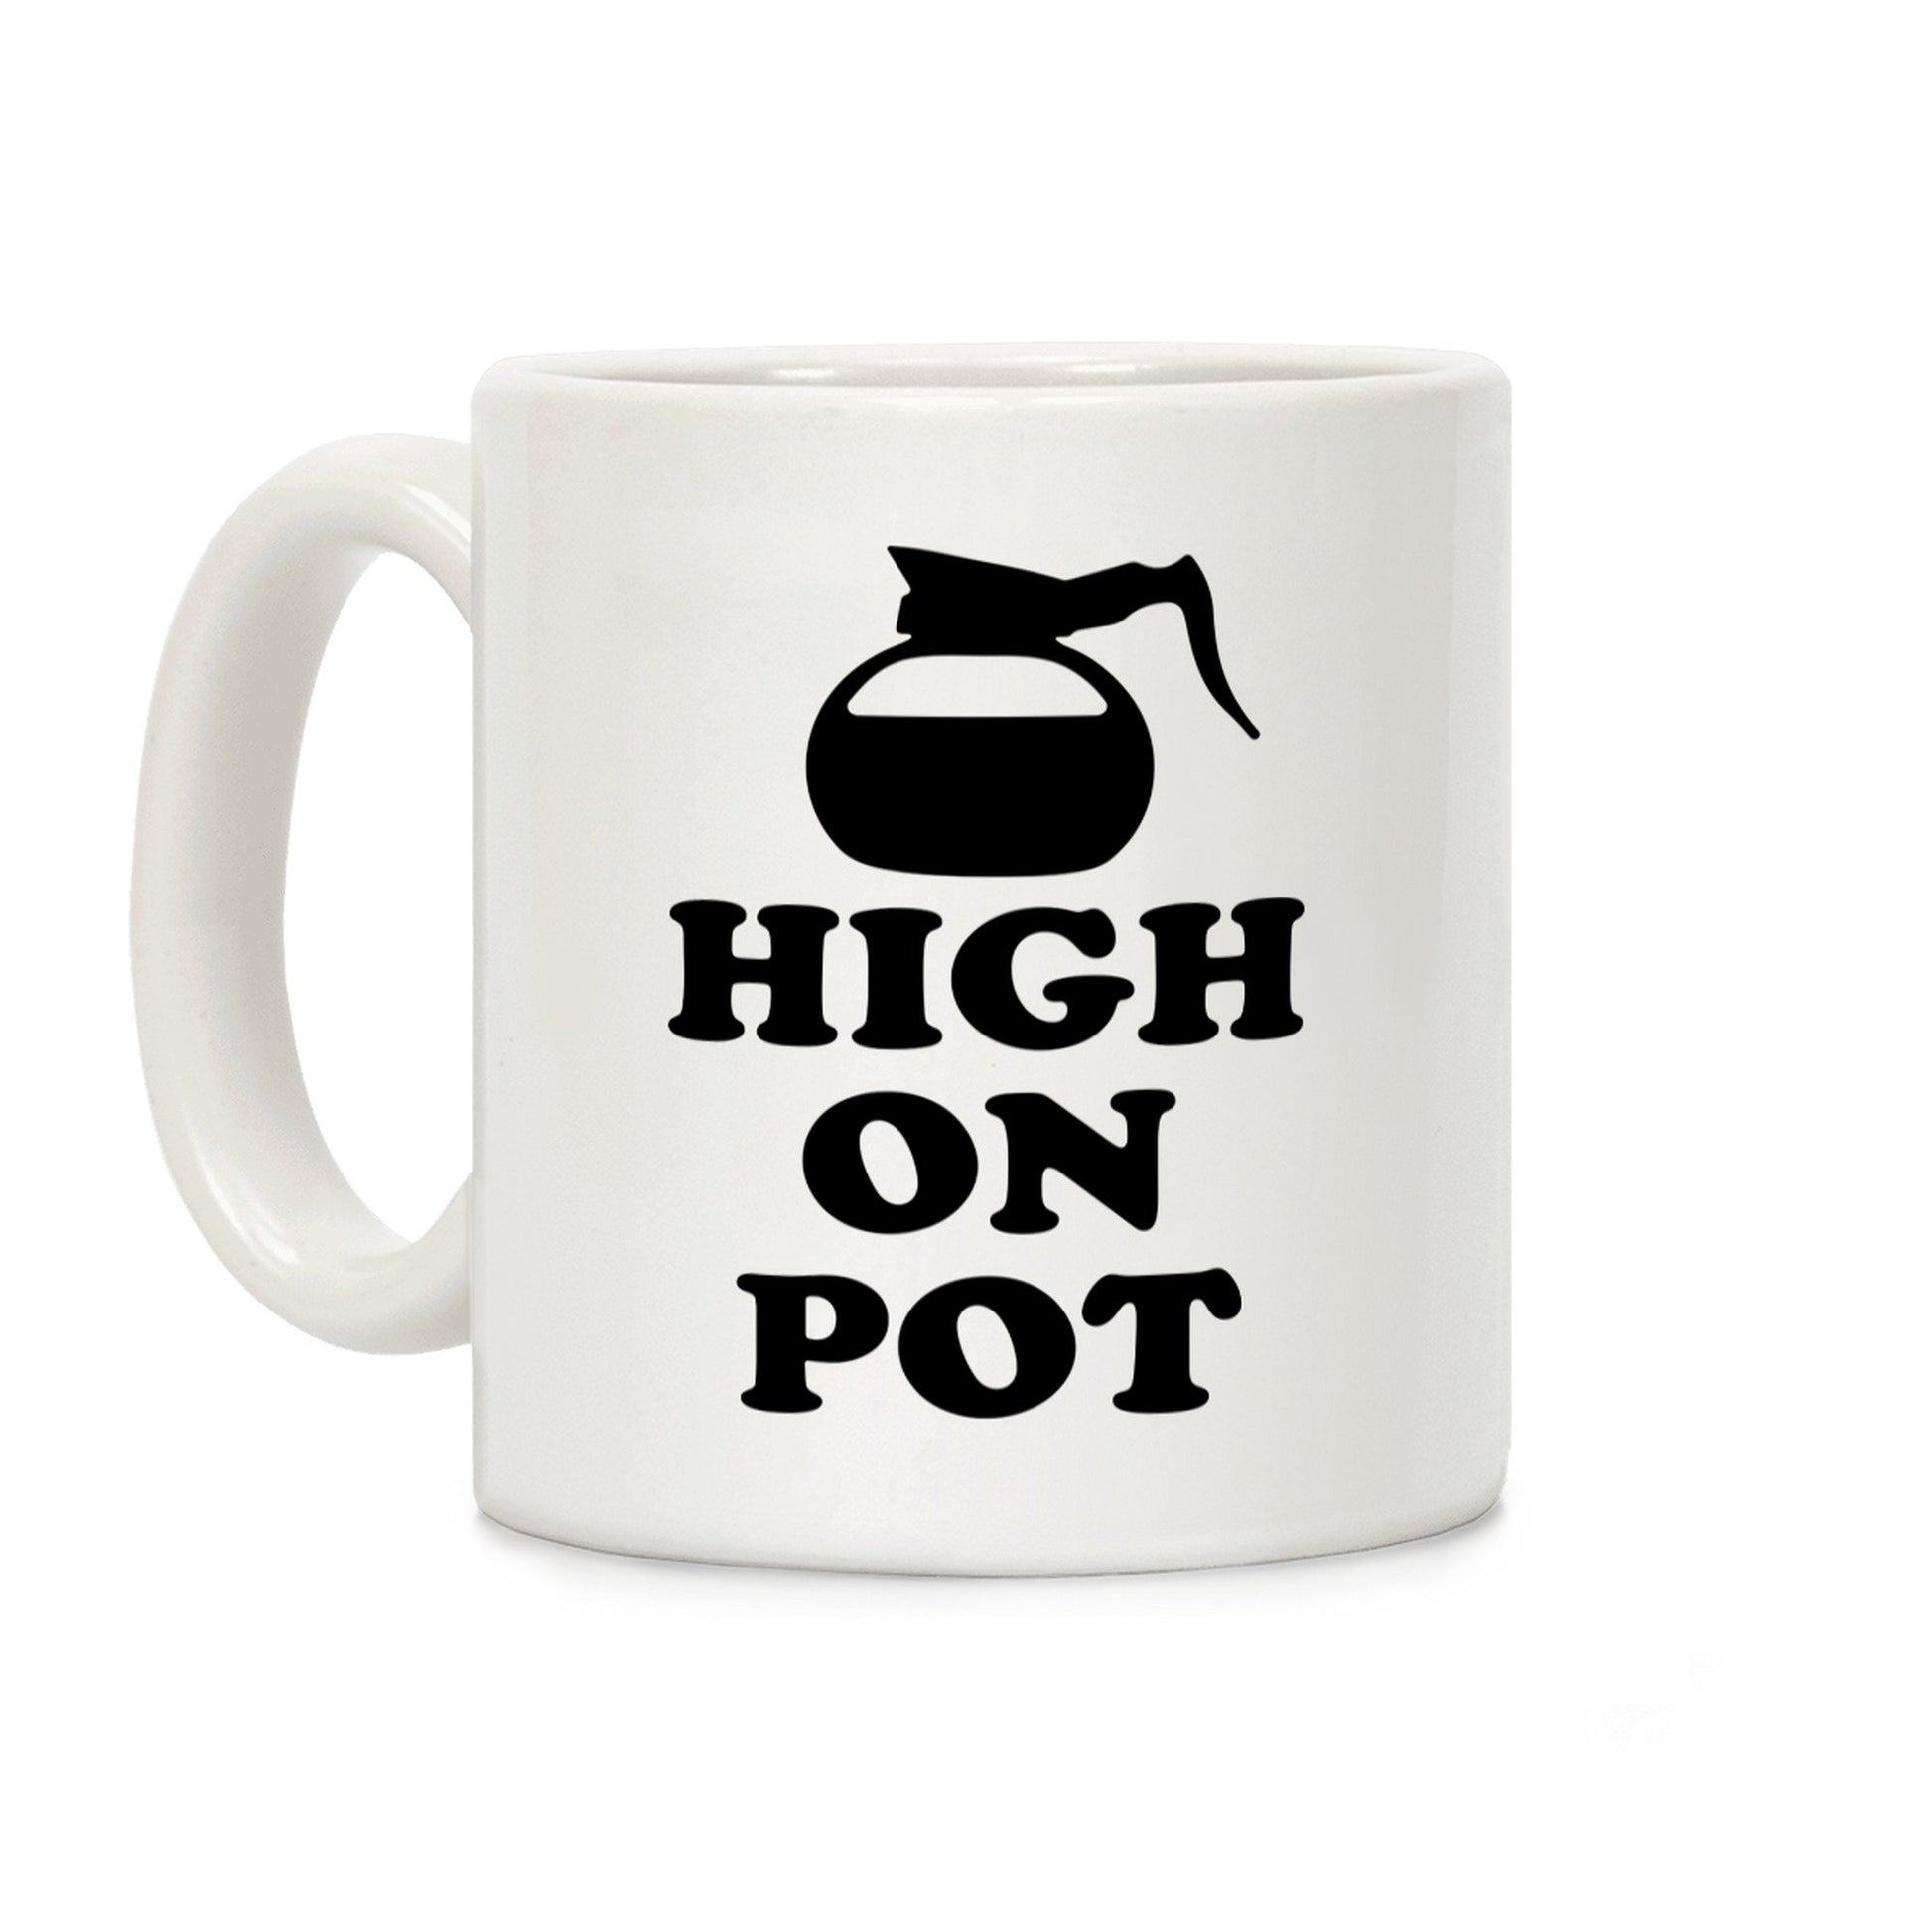 High On Pot Ceramic Coffee Mug by LookHUMAN Flower Power Packages 